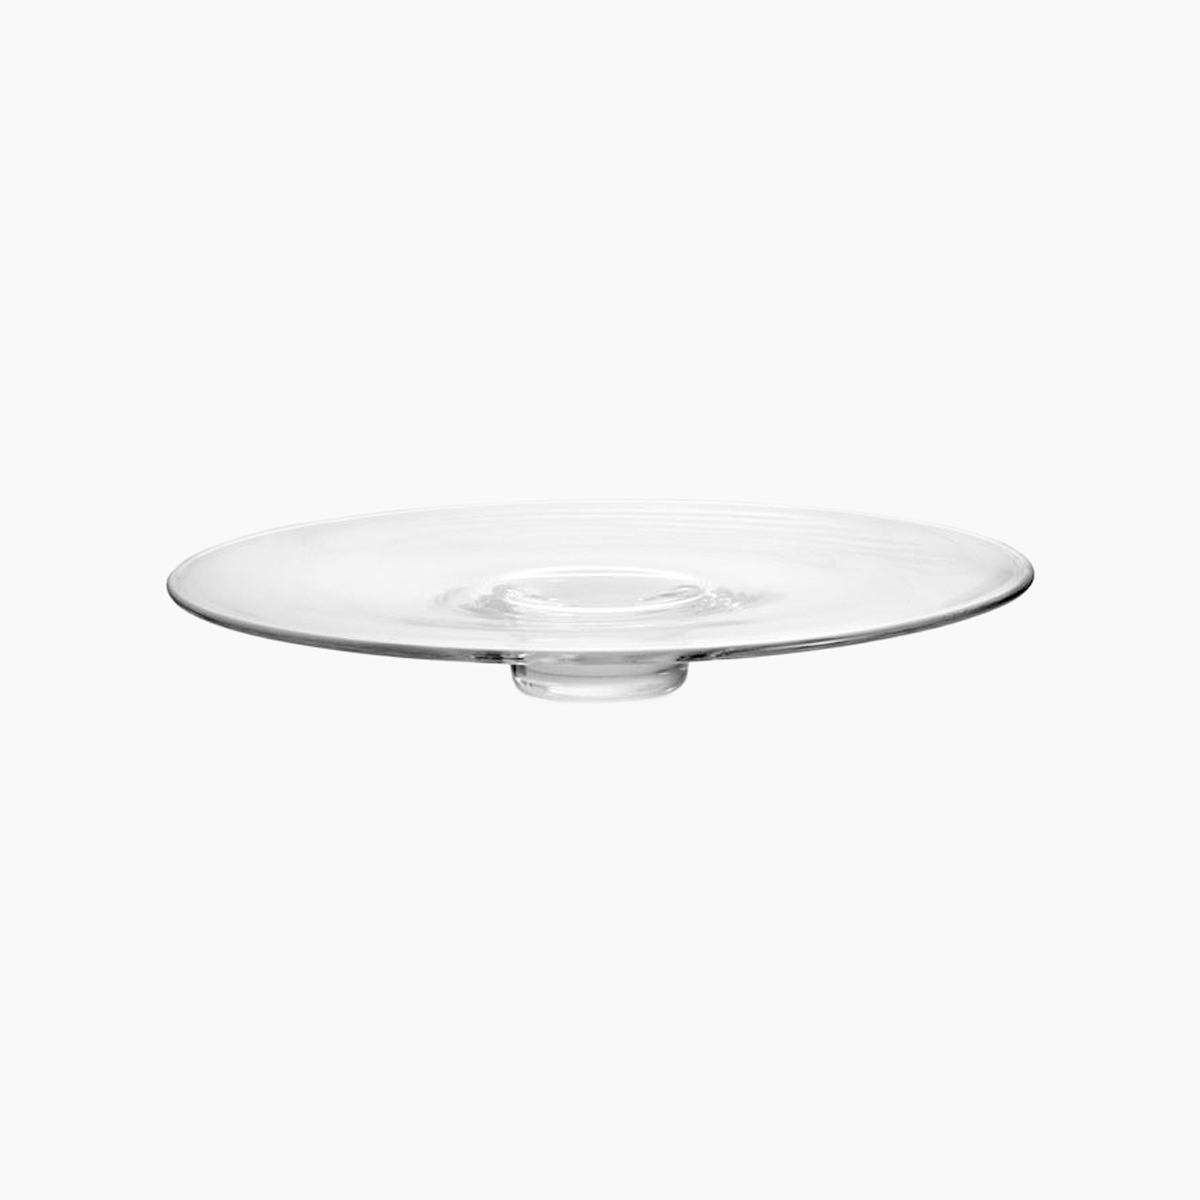 A clear glass round platter.